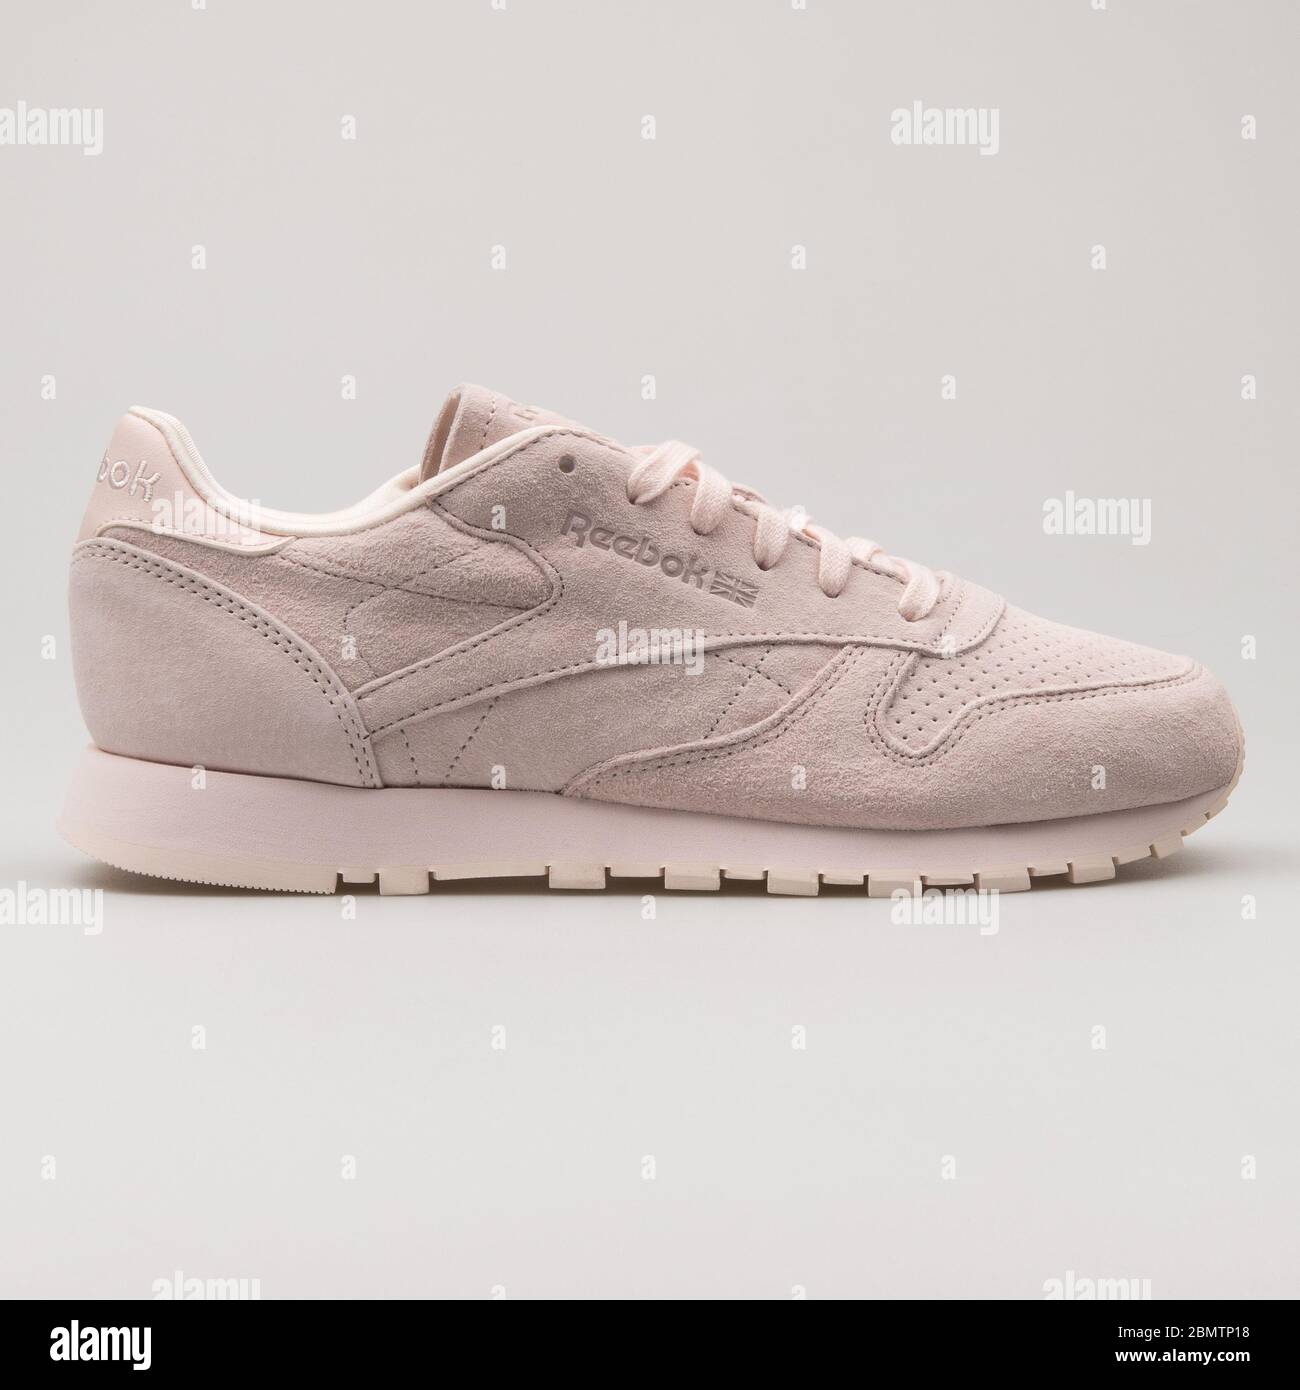 Reebok Classic High Resolution Stock Photography and Images - Alamy